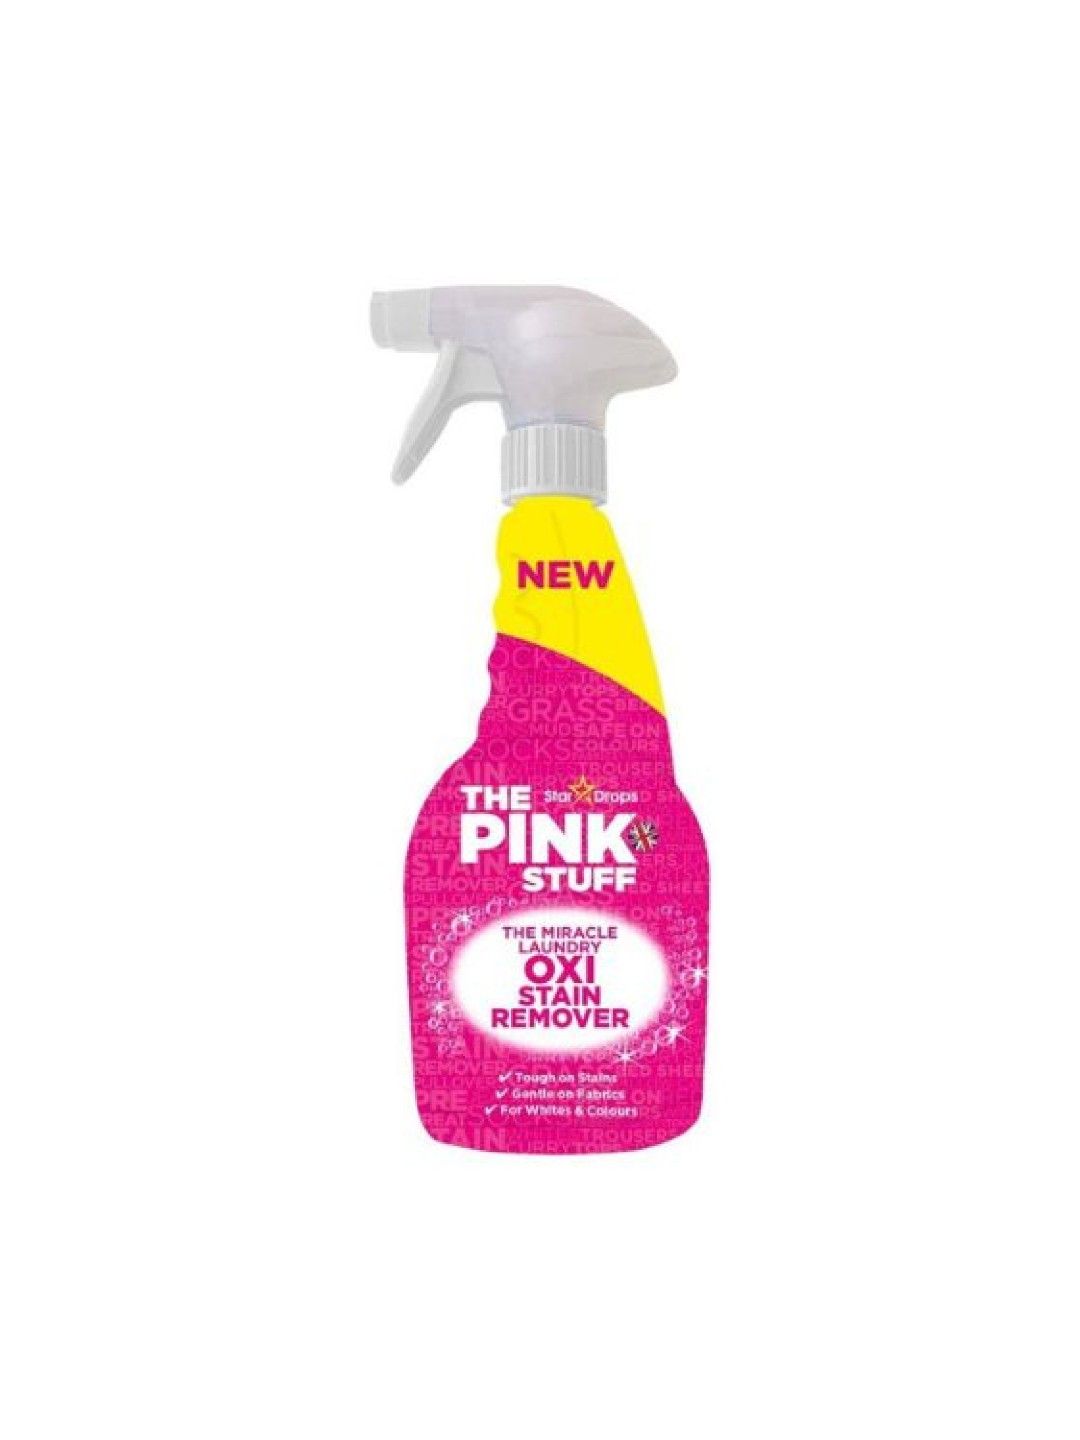 Starbrands The Pink Stuff Oxi Stain Remover